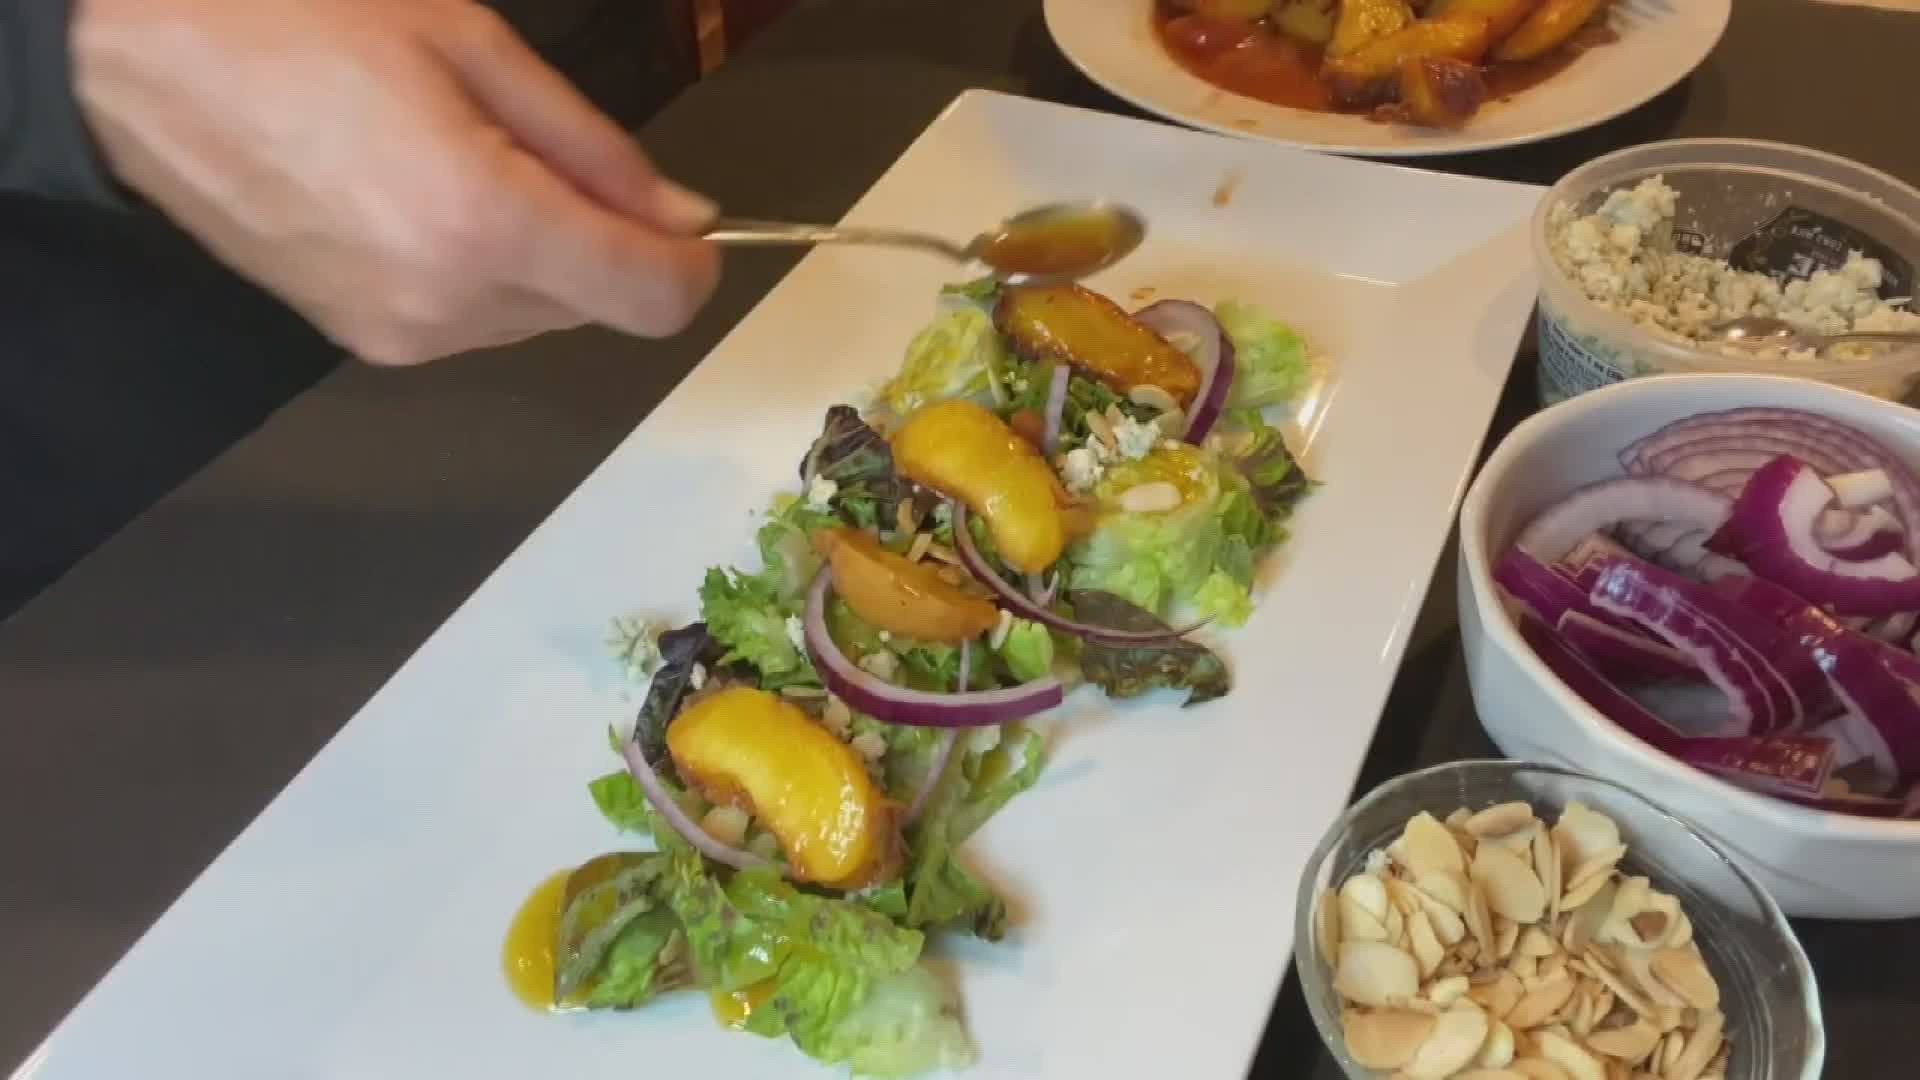 Chef Char shows us how to make a Grilled Peach Salad, perfect for the end of summer.